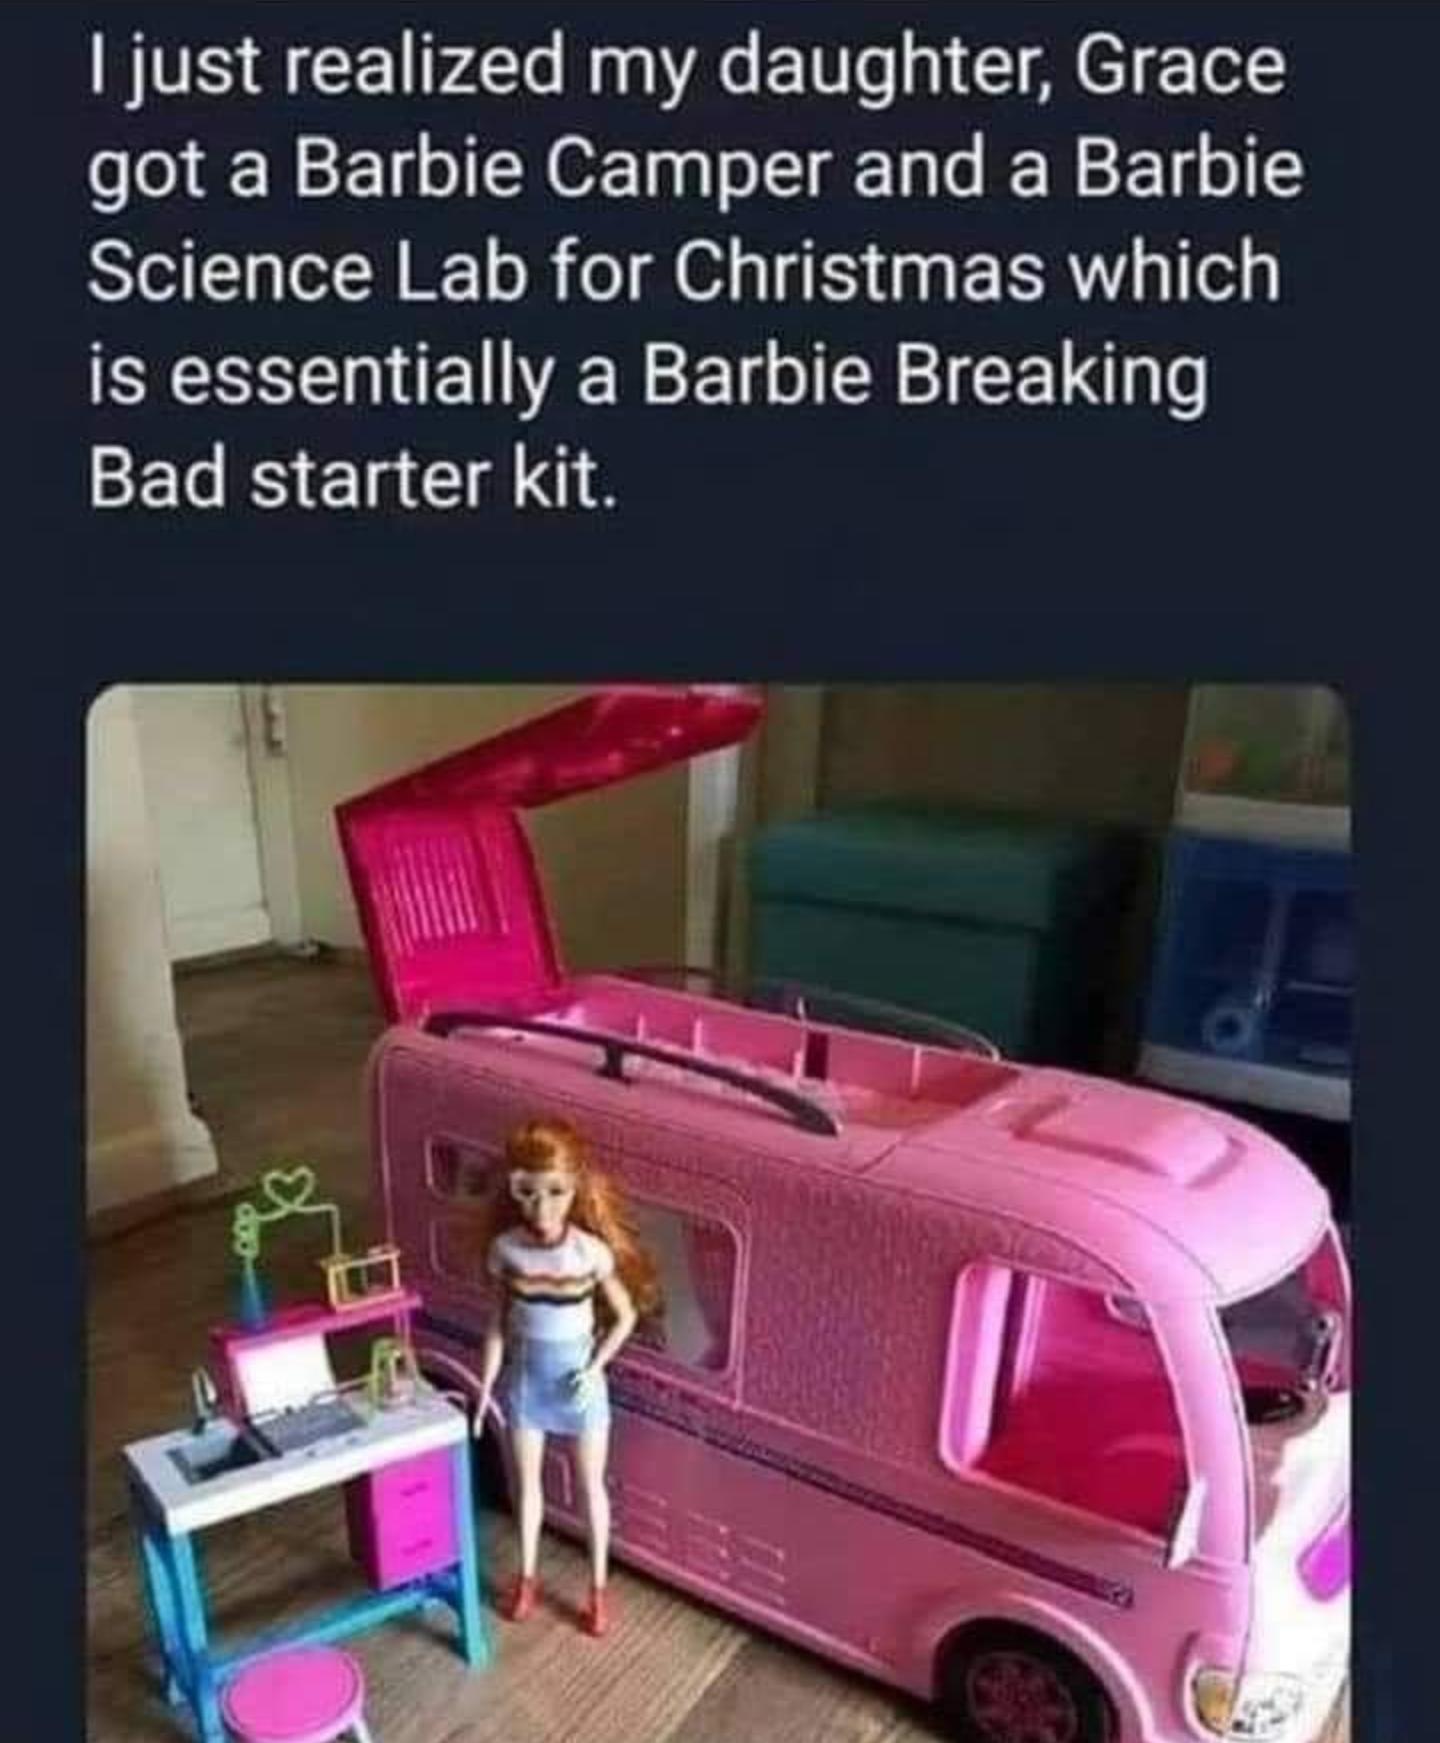 random pics - barbie breaking bad - I just realized my daughter, Grace got a Barbie Camper and a Barbie Science Lab for Christmas which is essentially a Barbie Breaking Bad starter kit.